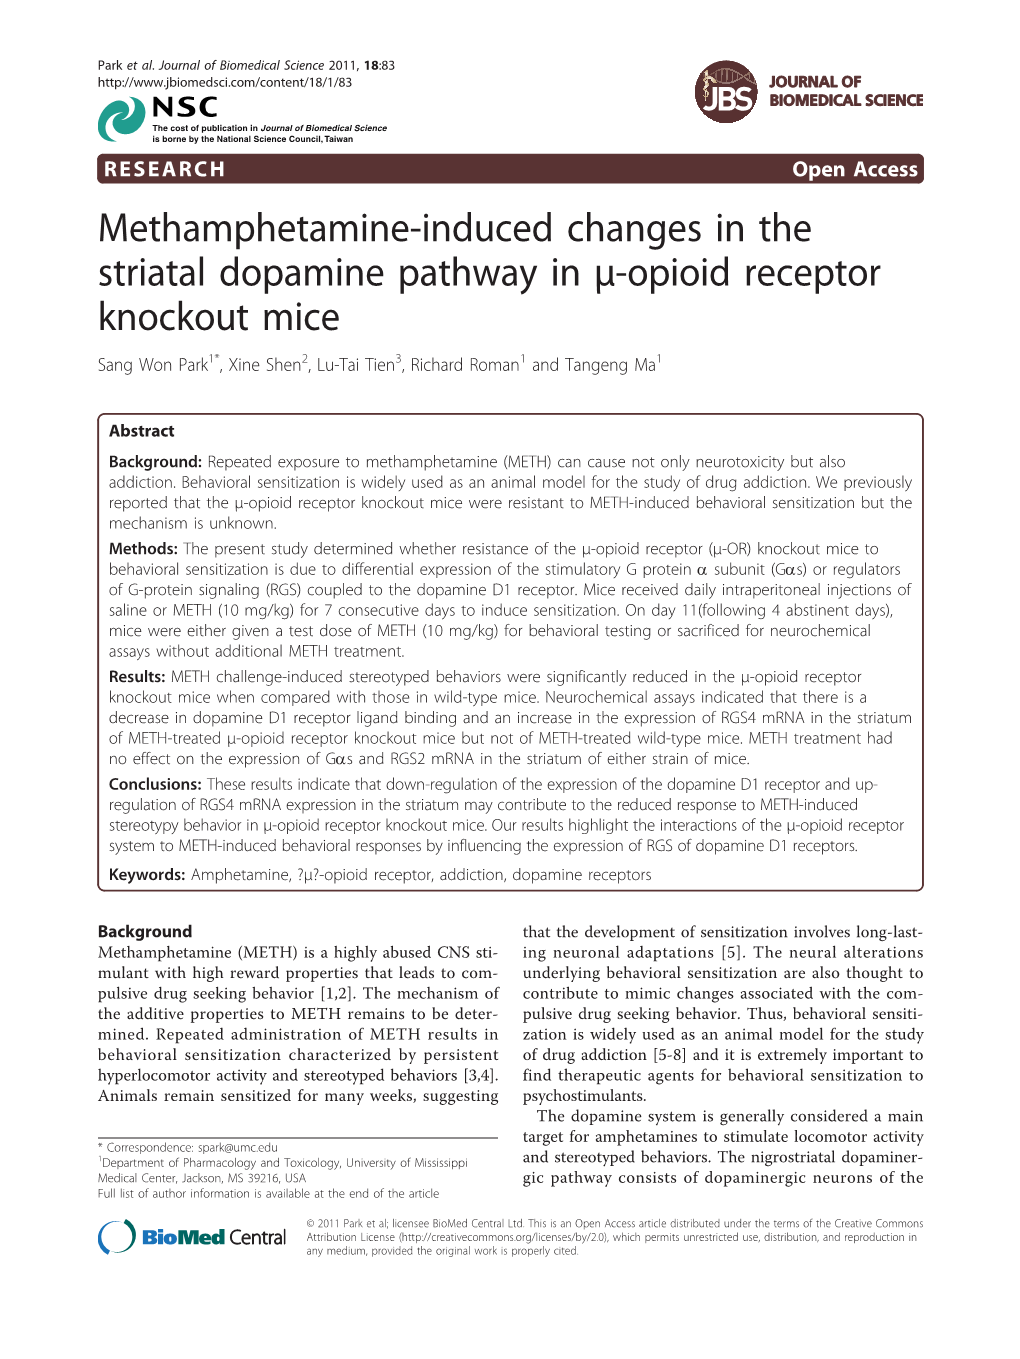 Methamphetamine-Induced Changes in the Striatal Dopamine Pathway In